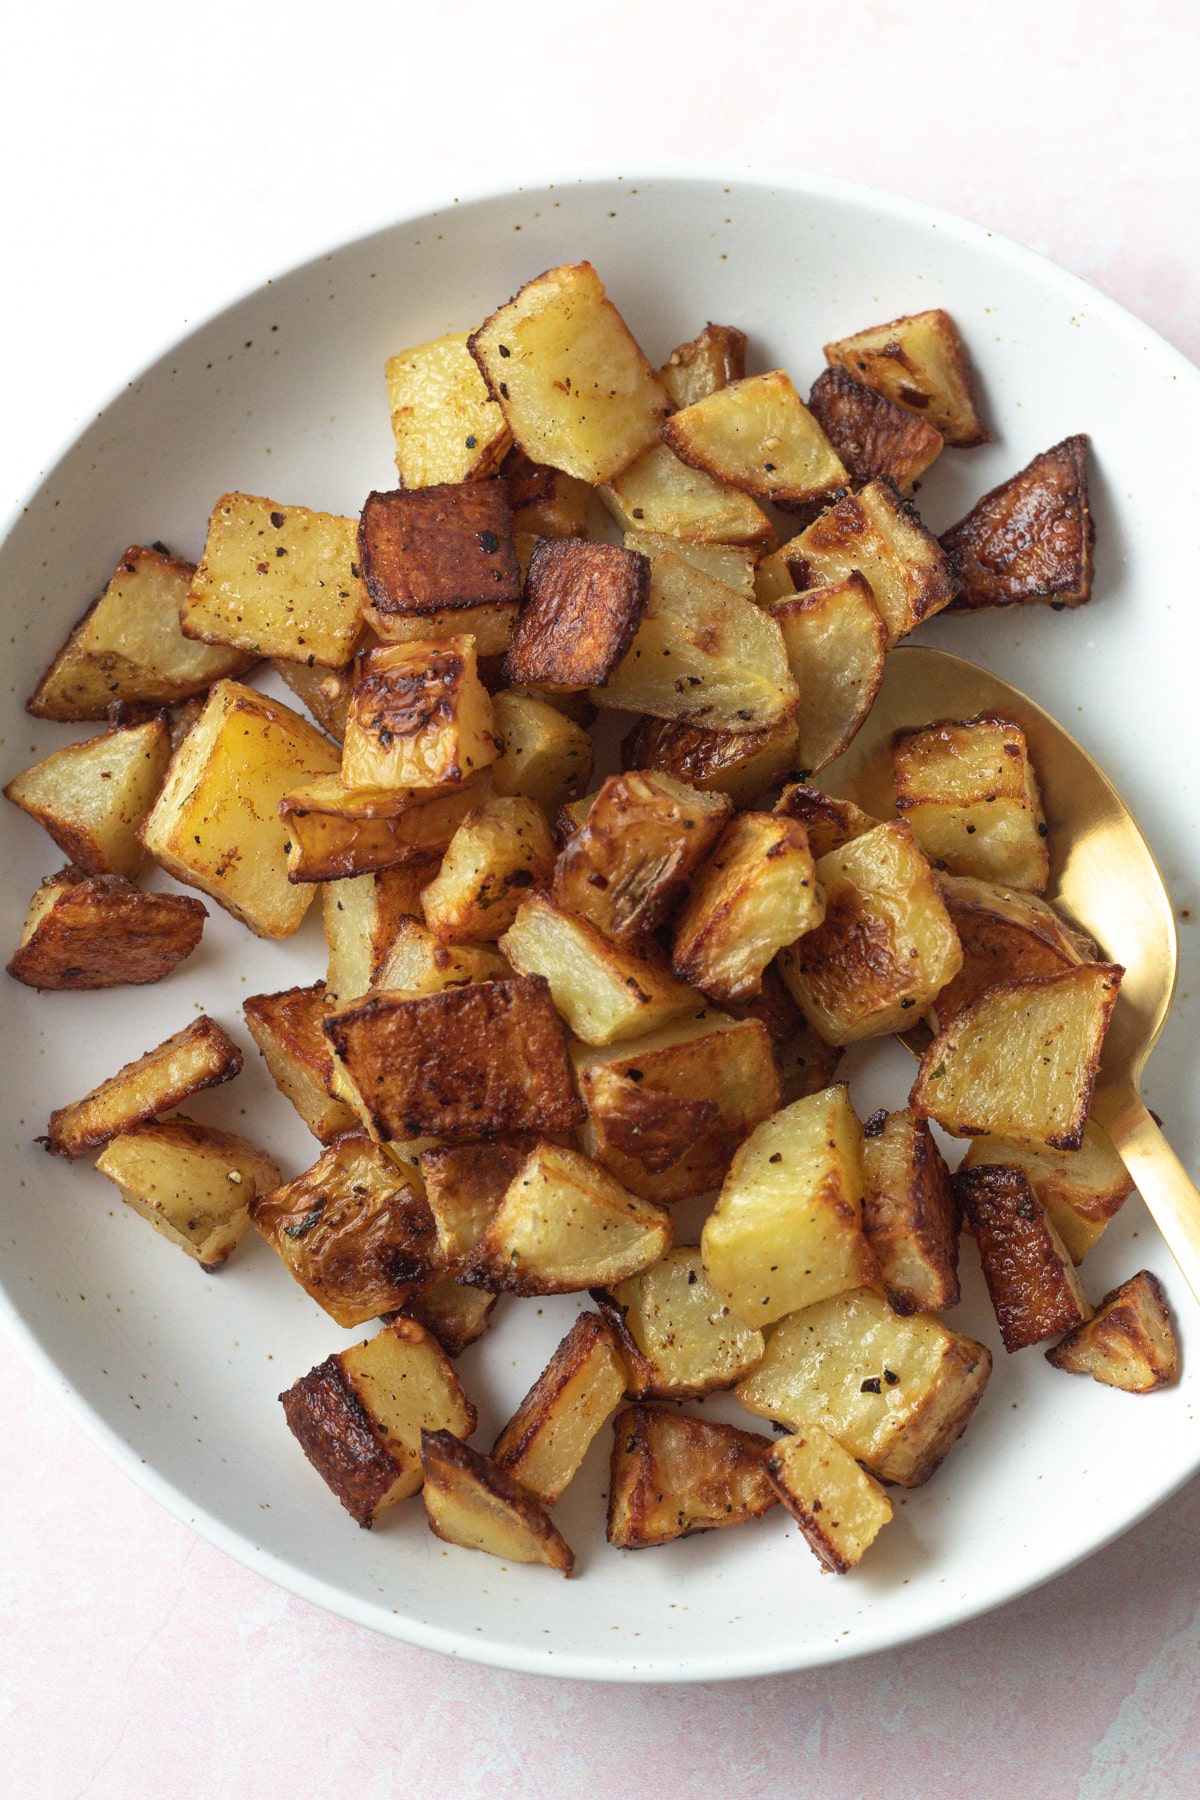 Roasted potatoes in bowl with serving spoon.